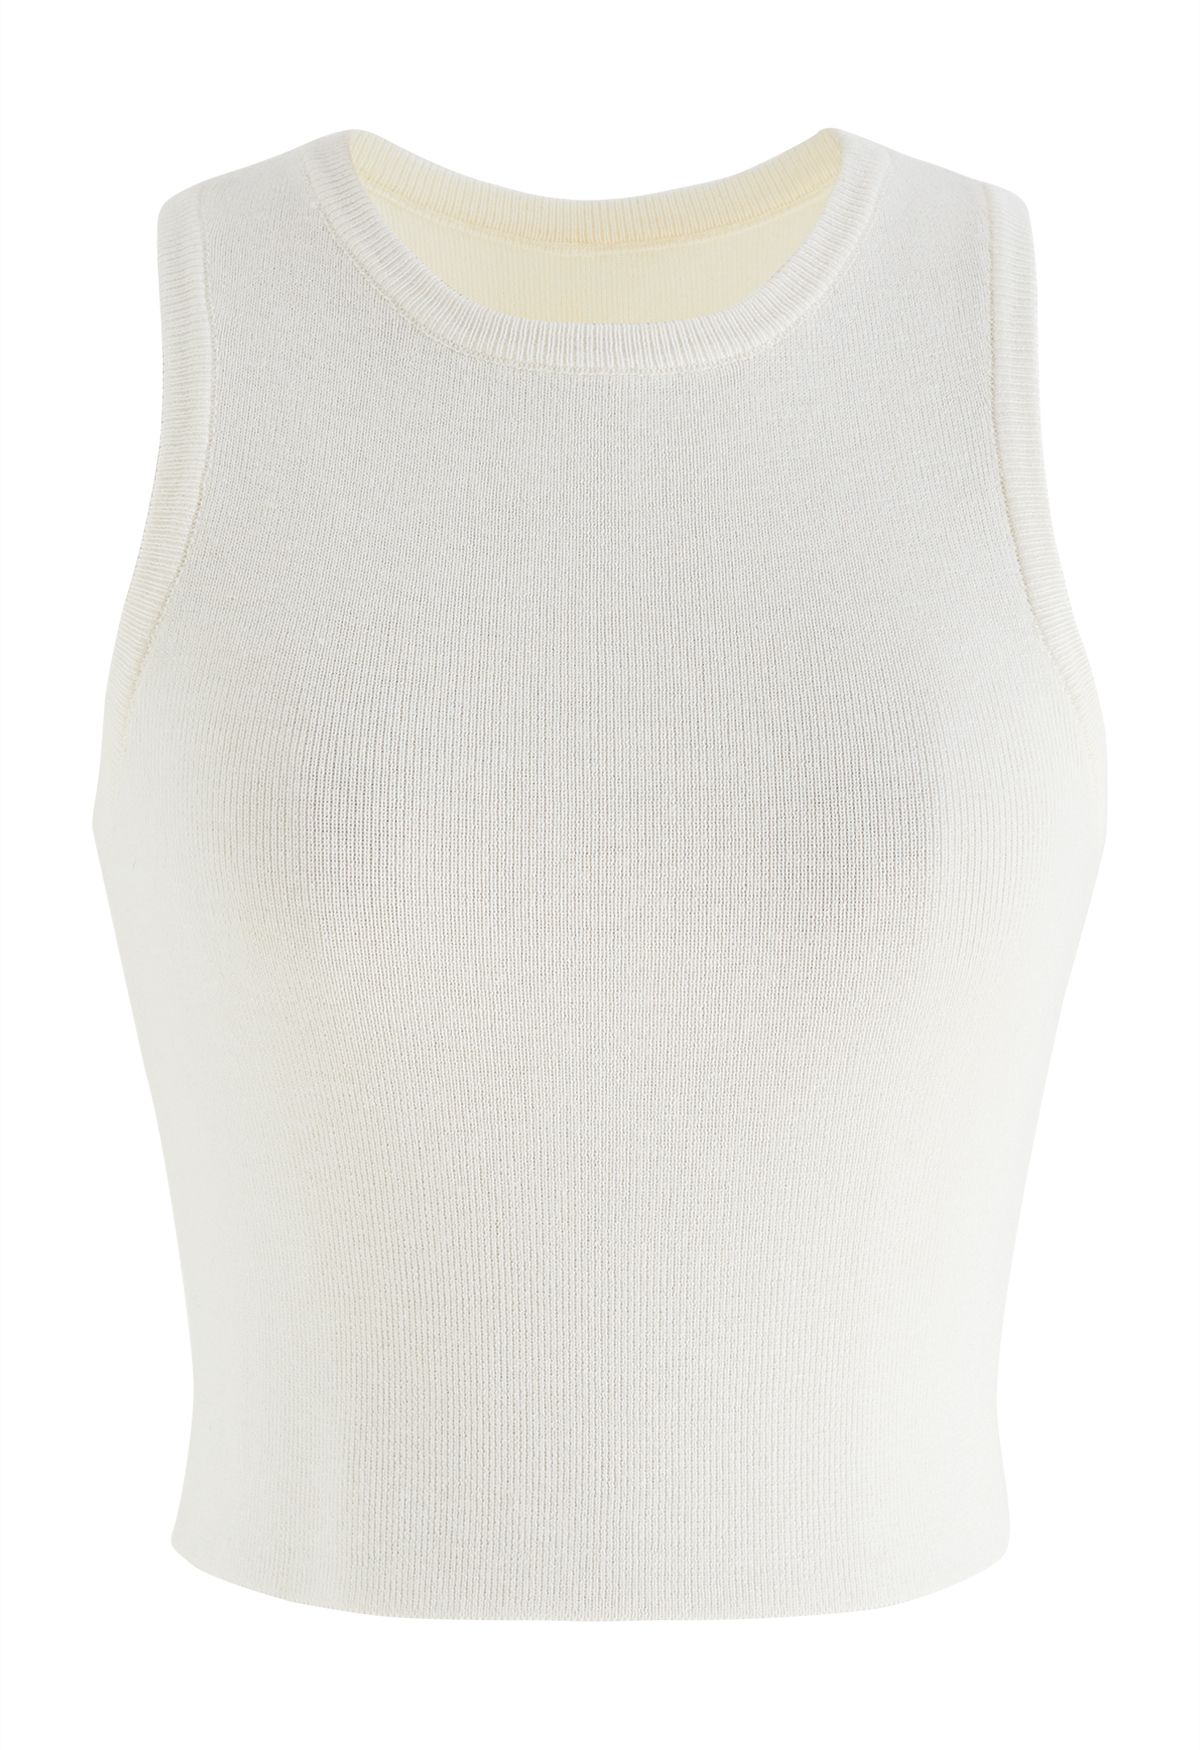 Lithesome Comfort Knit Tank Top in Ivory | Chicwish